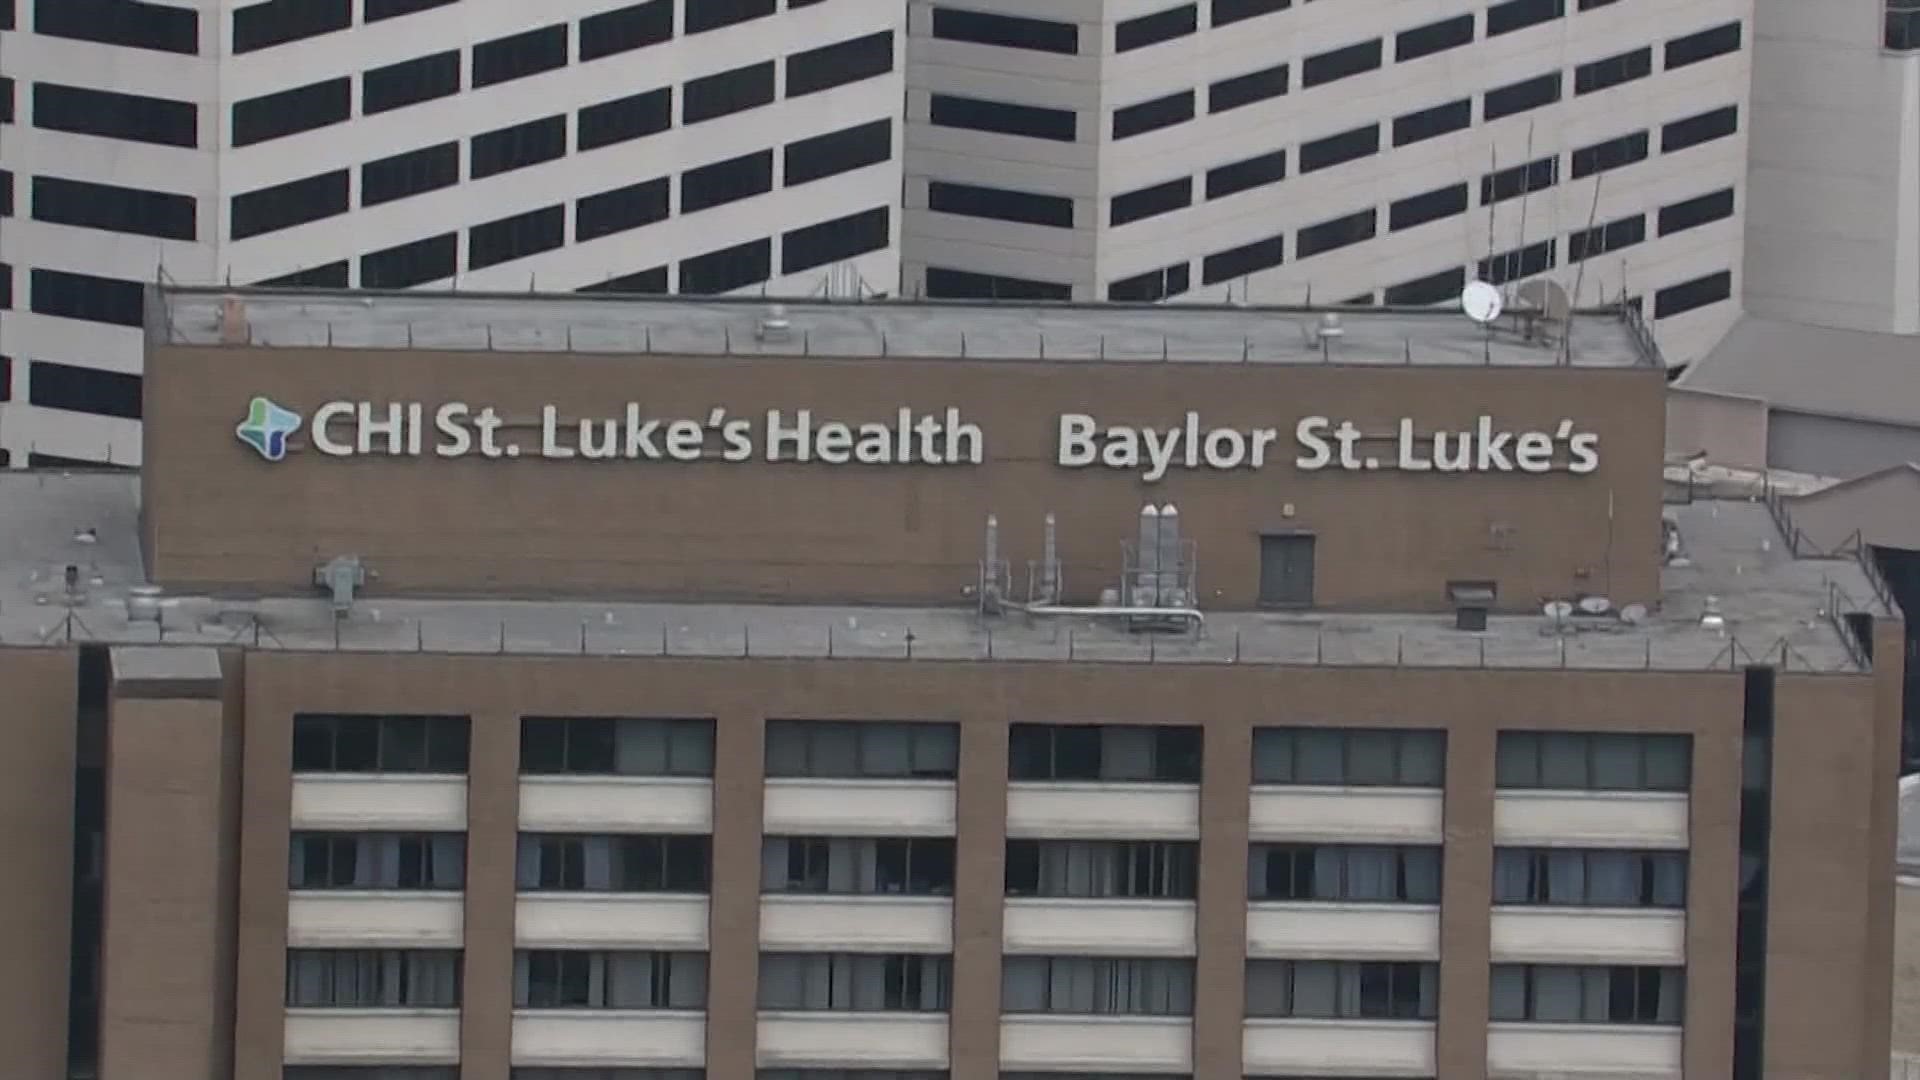 CommonSpirit Health, St. Luke's parent company, said it was working to restore its systems after a ransomware attack.